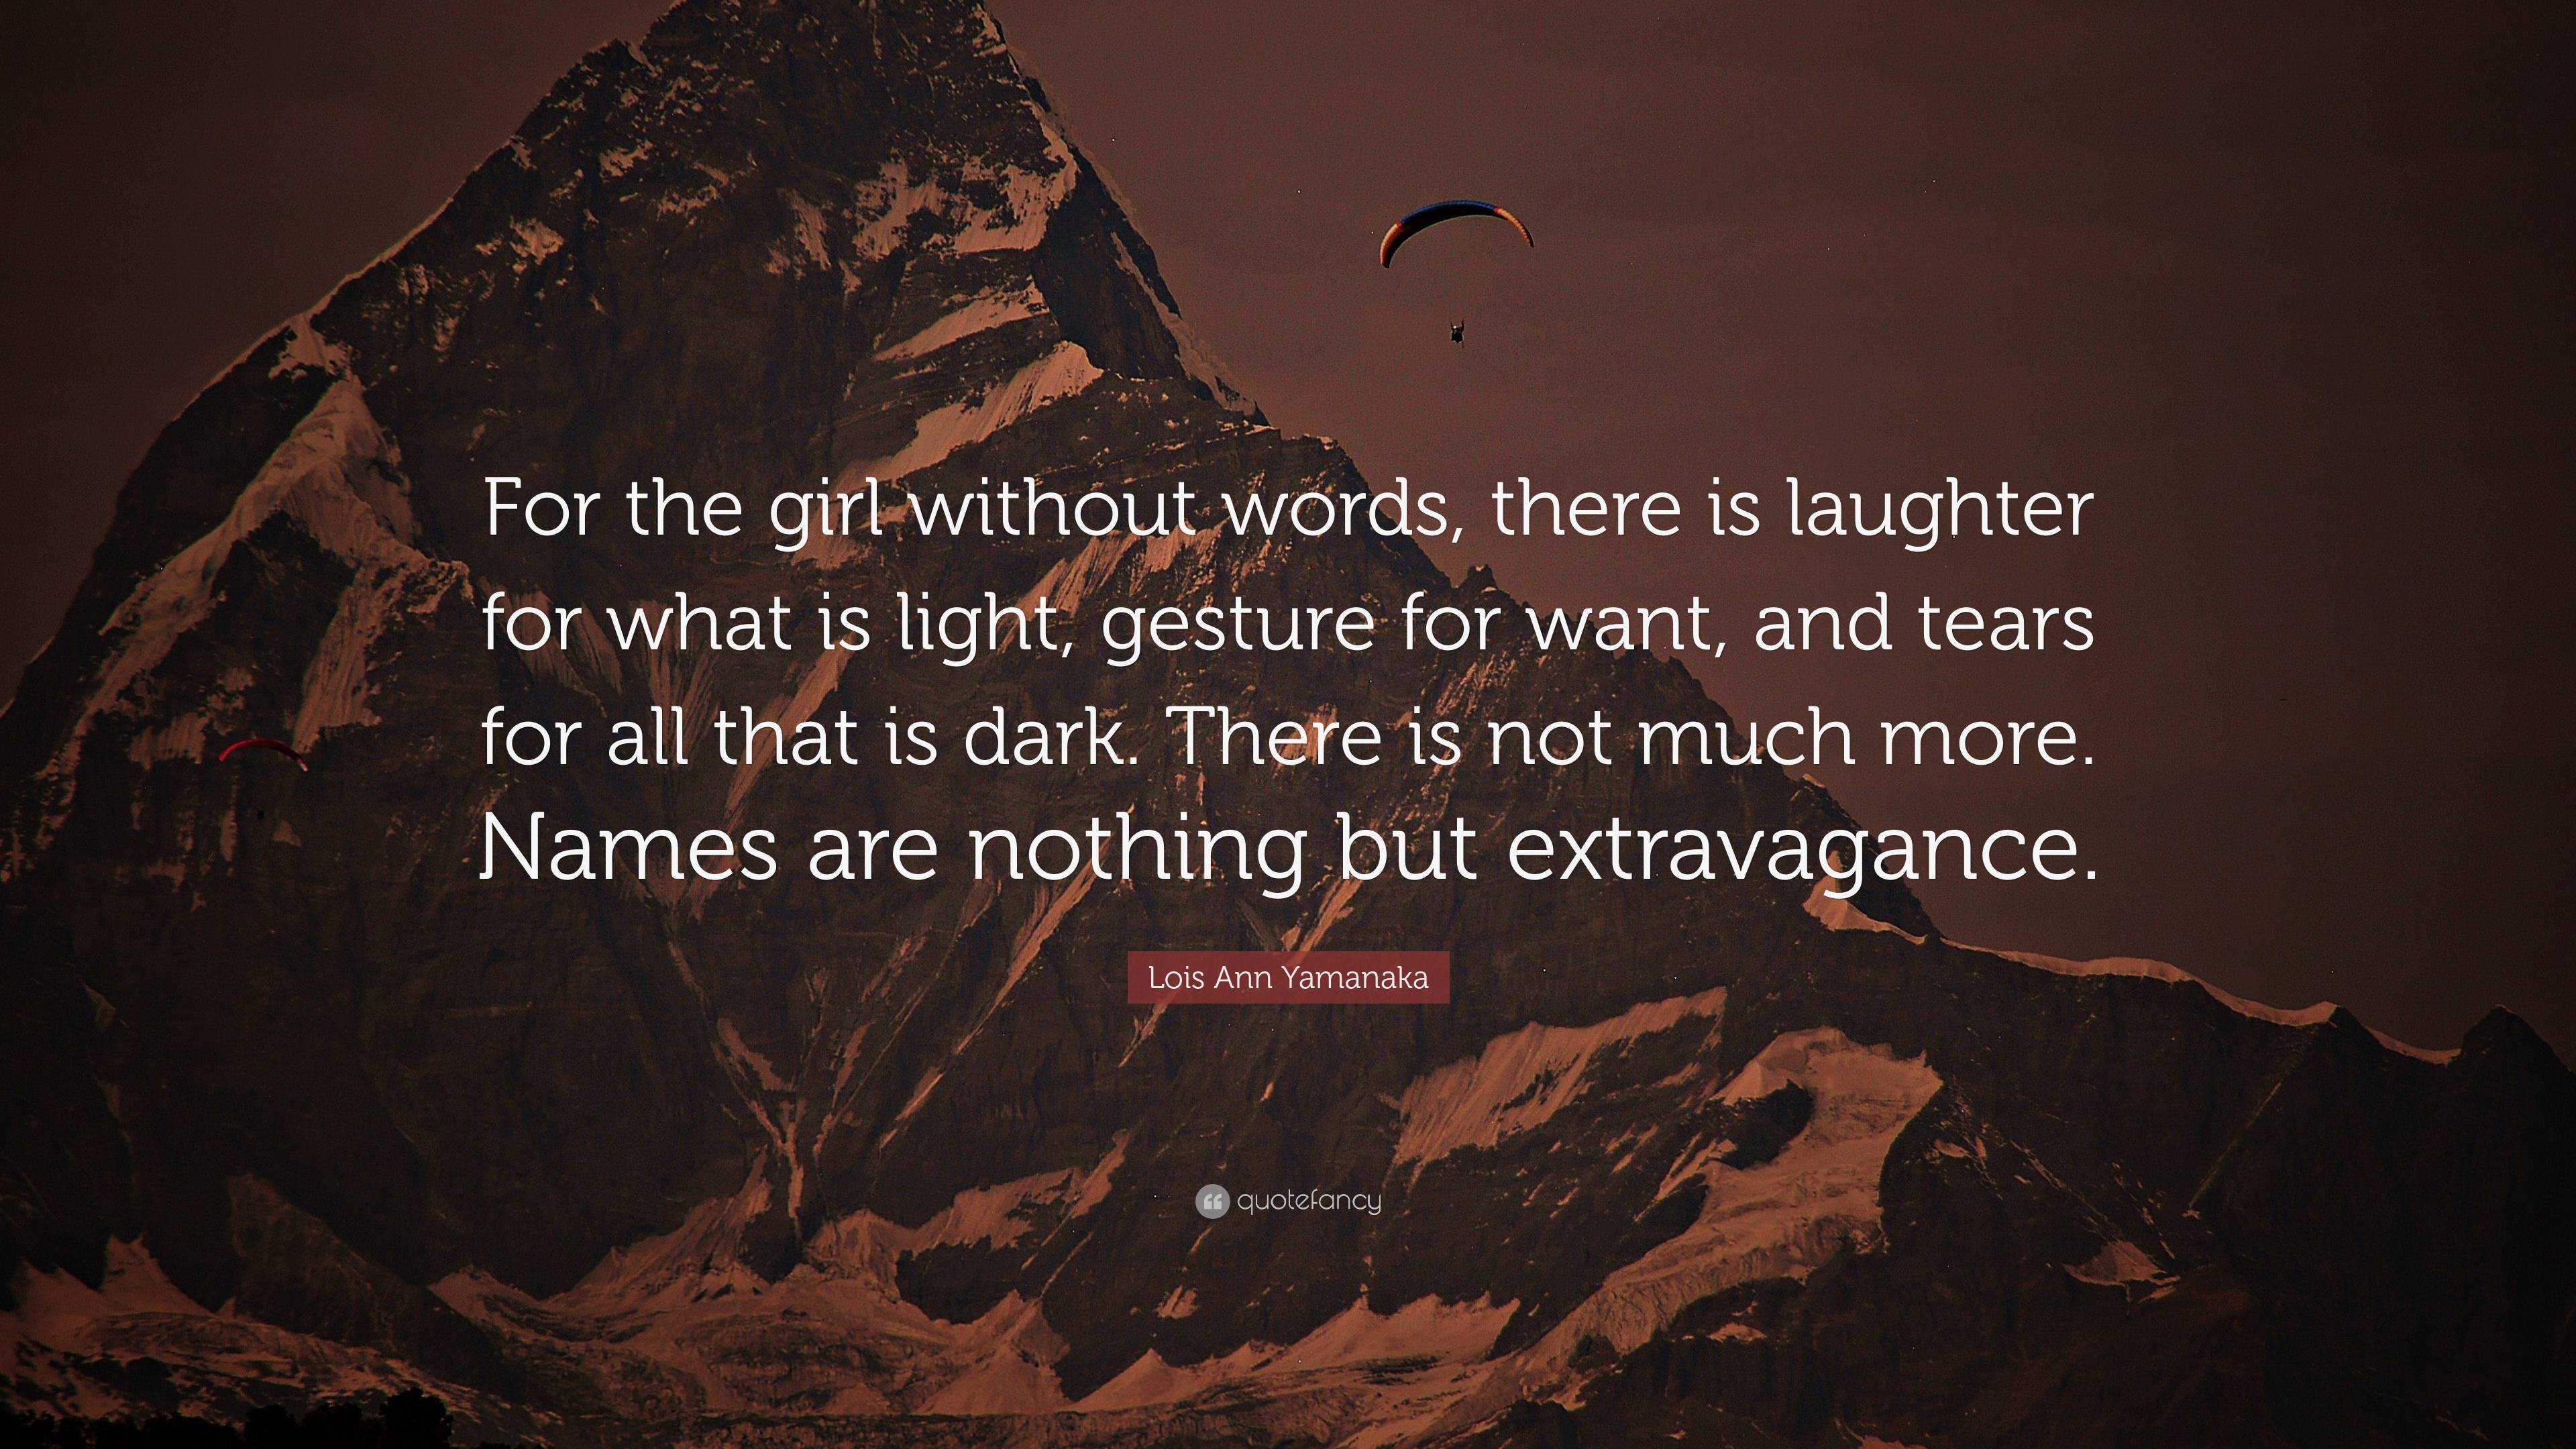 Lois Ann Yamanaka Quote: “For the girl without words, there is laughter ...